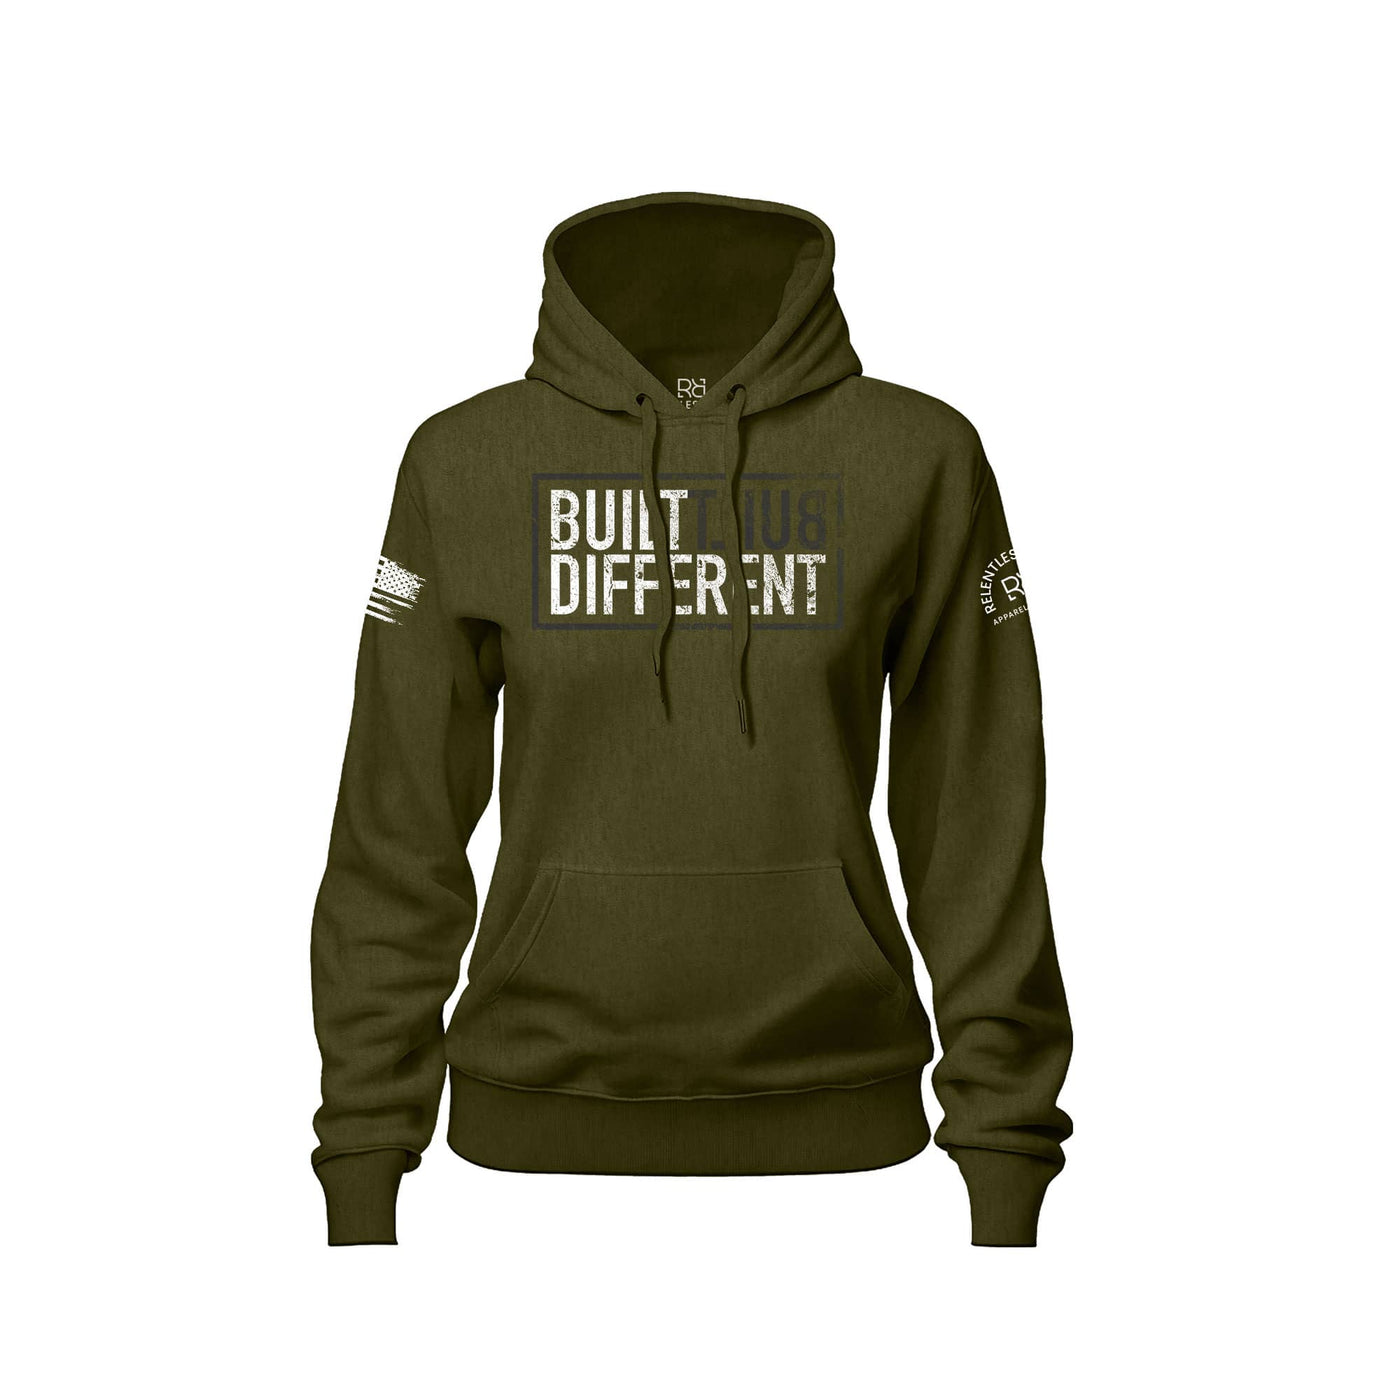 Built Different Women's front design military green hoodie